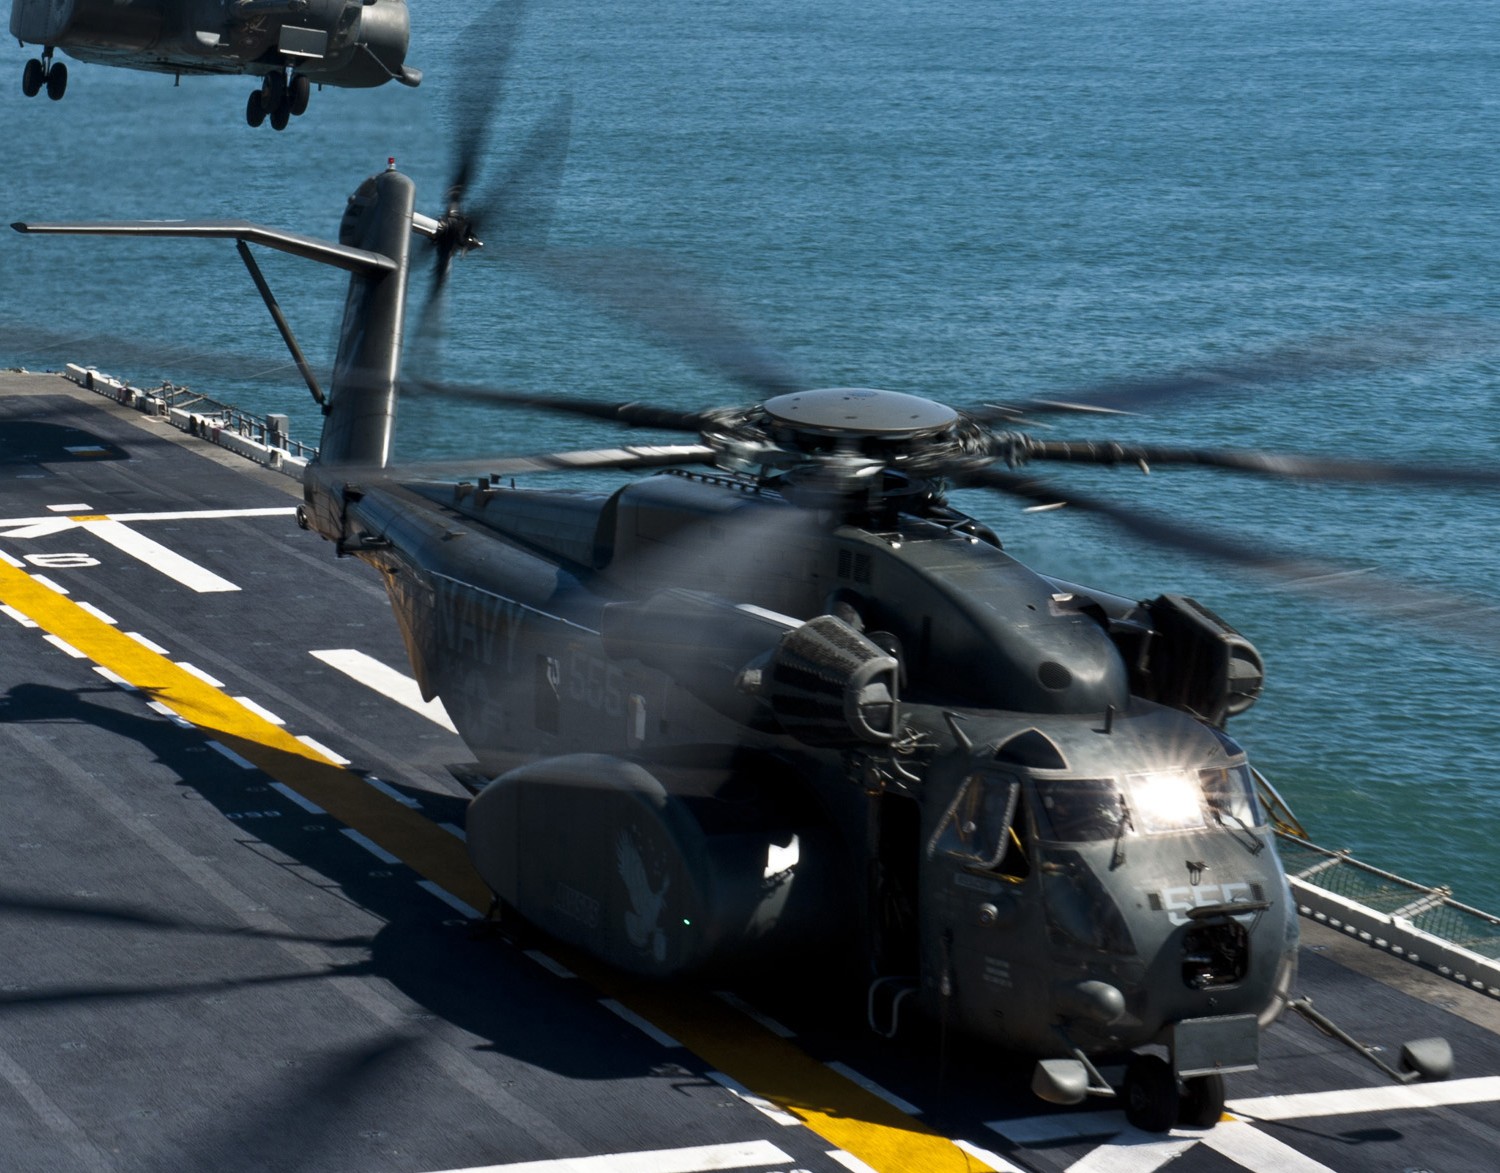 hm-14 vanguard helicopter mine countermeasures squadron navy mh-53e sea dragon 148 uss wasp lhd-1